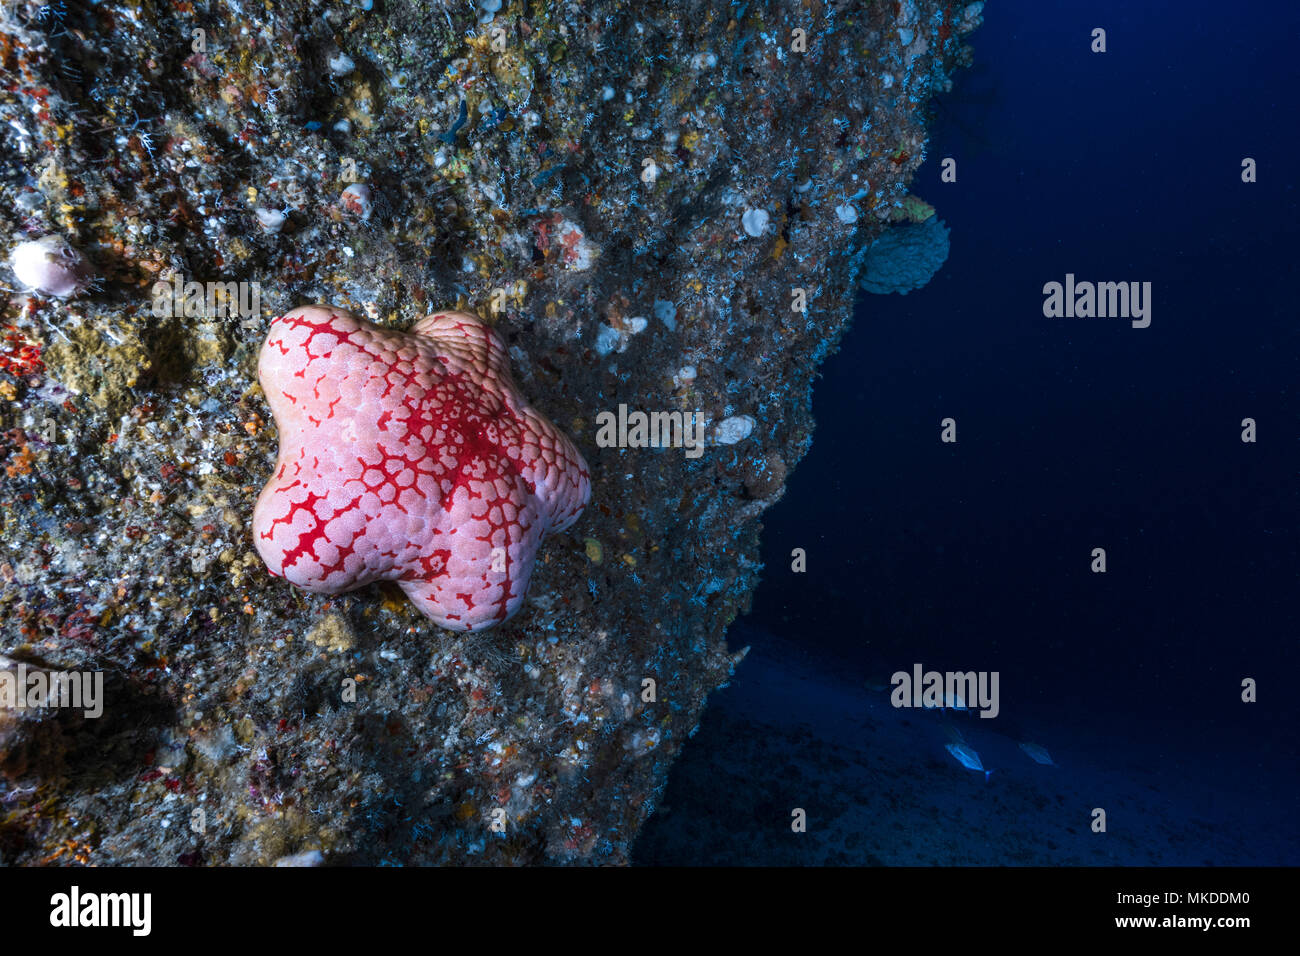 Pumpkin sea star (Astrosarkus sp.) attached to rock wall, 90 meters depth, indian Ocean, Mayotte. Possibly new species. Stock Photo